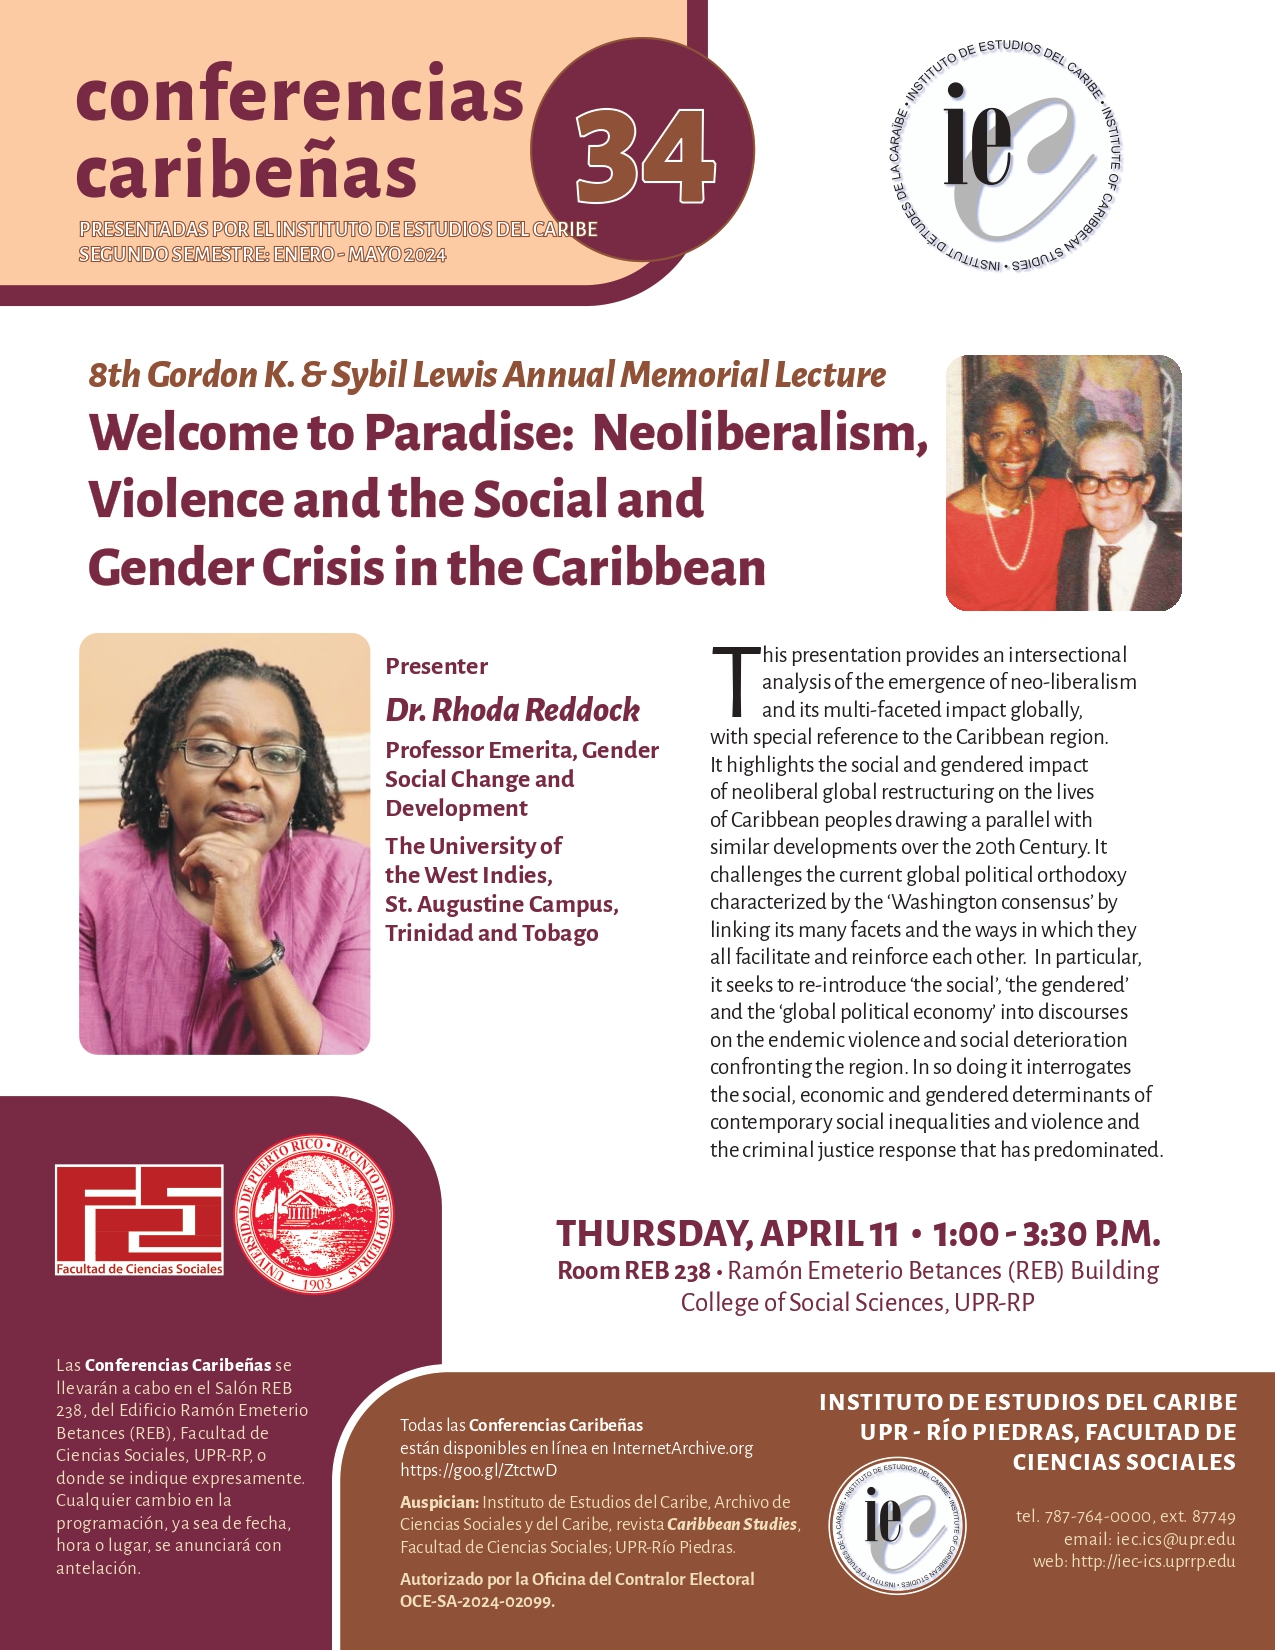 Welcome to Paradise: Neoliberalism, Violence and the Social and Gender Crisis in the Caribbean